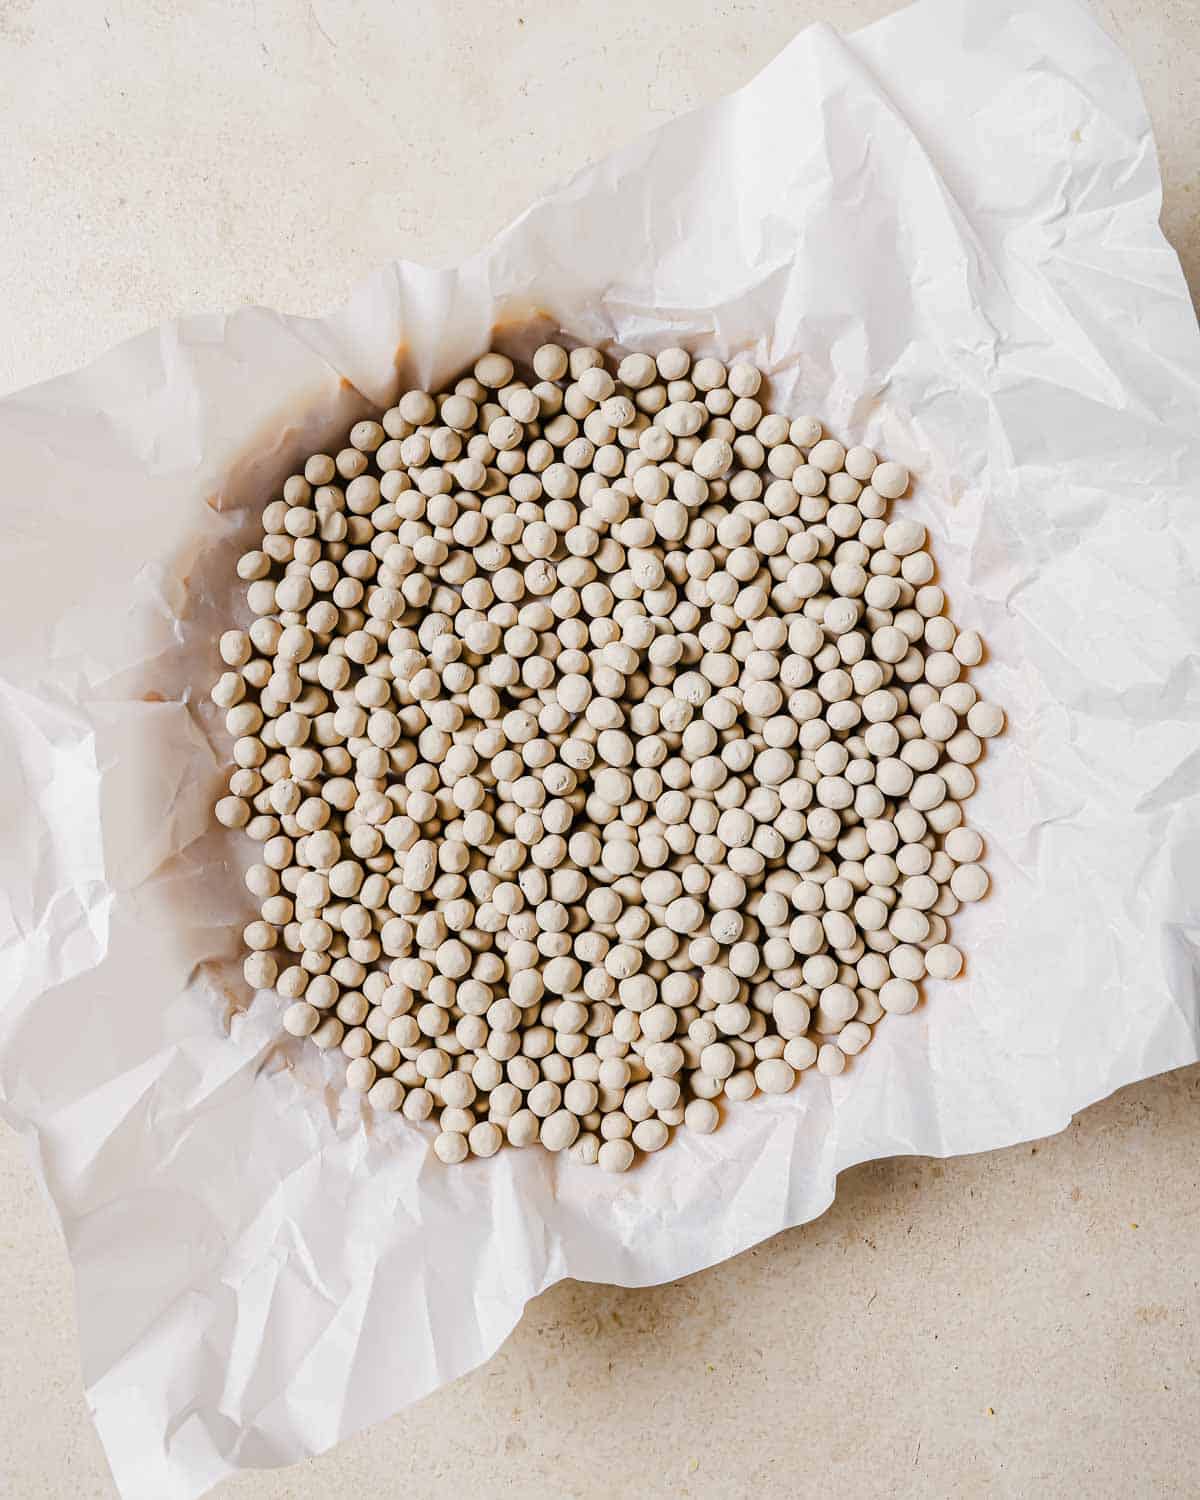 Dry baking beans on parchment paper, spread out evenly on a light surface.